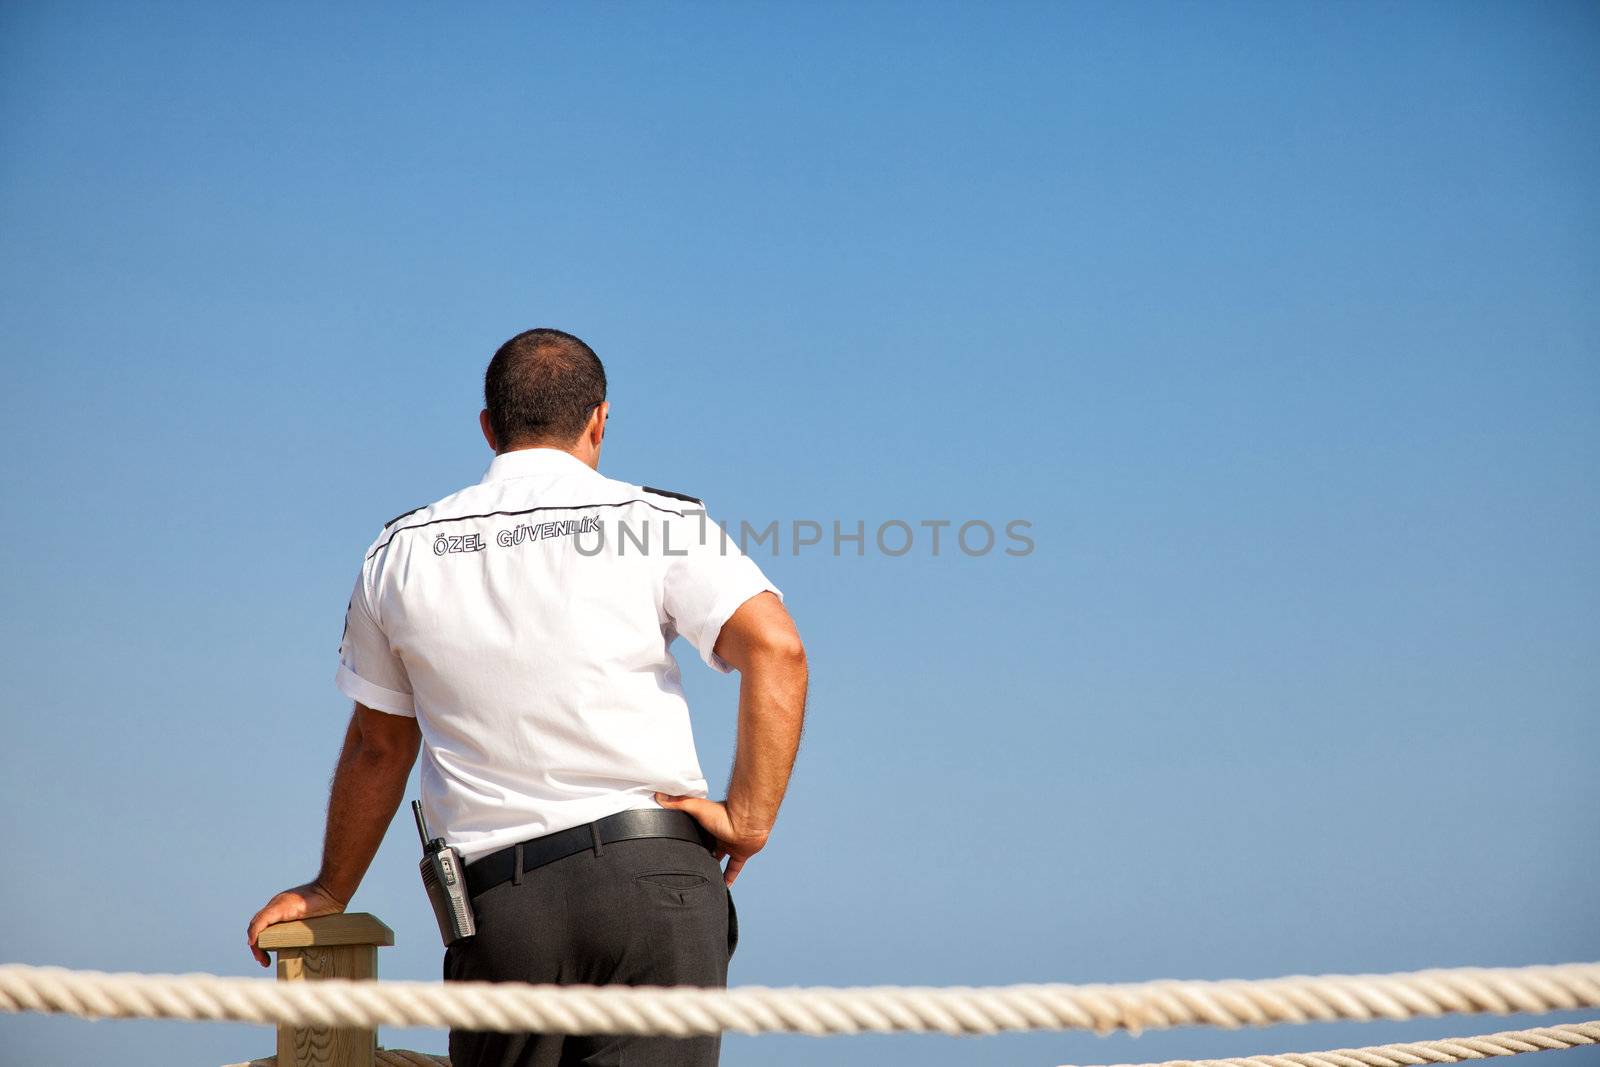 Security officer in Turkey on a blue sky